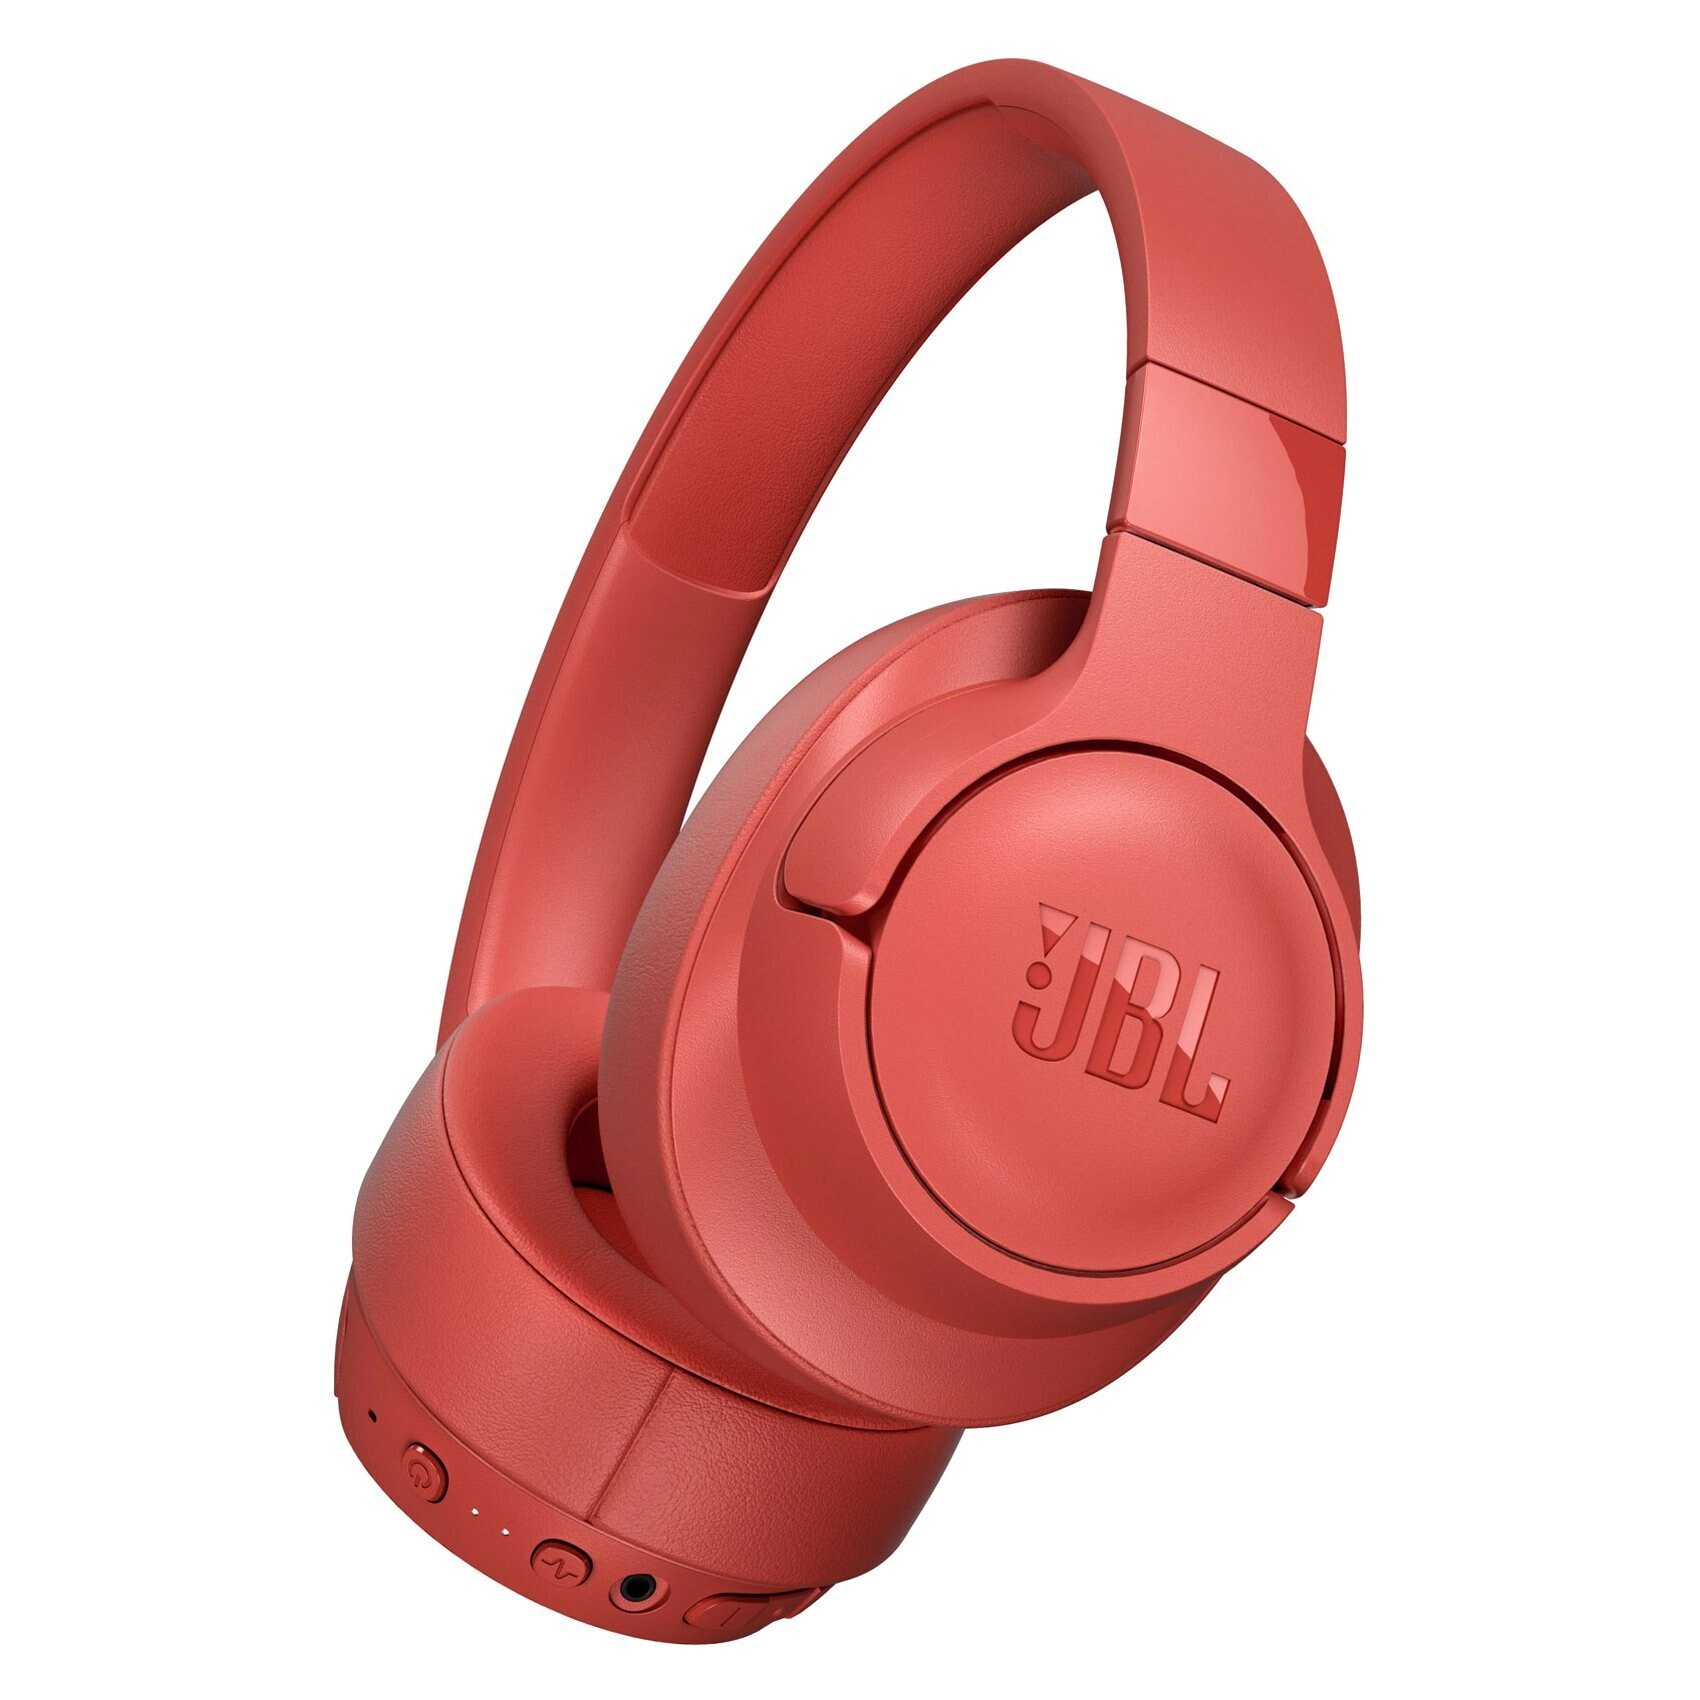 Buy JBL Tune 750BTNC Wireless Over Noise Cancelling Headphones Coral Online - Shop Smartphones, Tablets & Wearables on Carrefour UAE